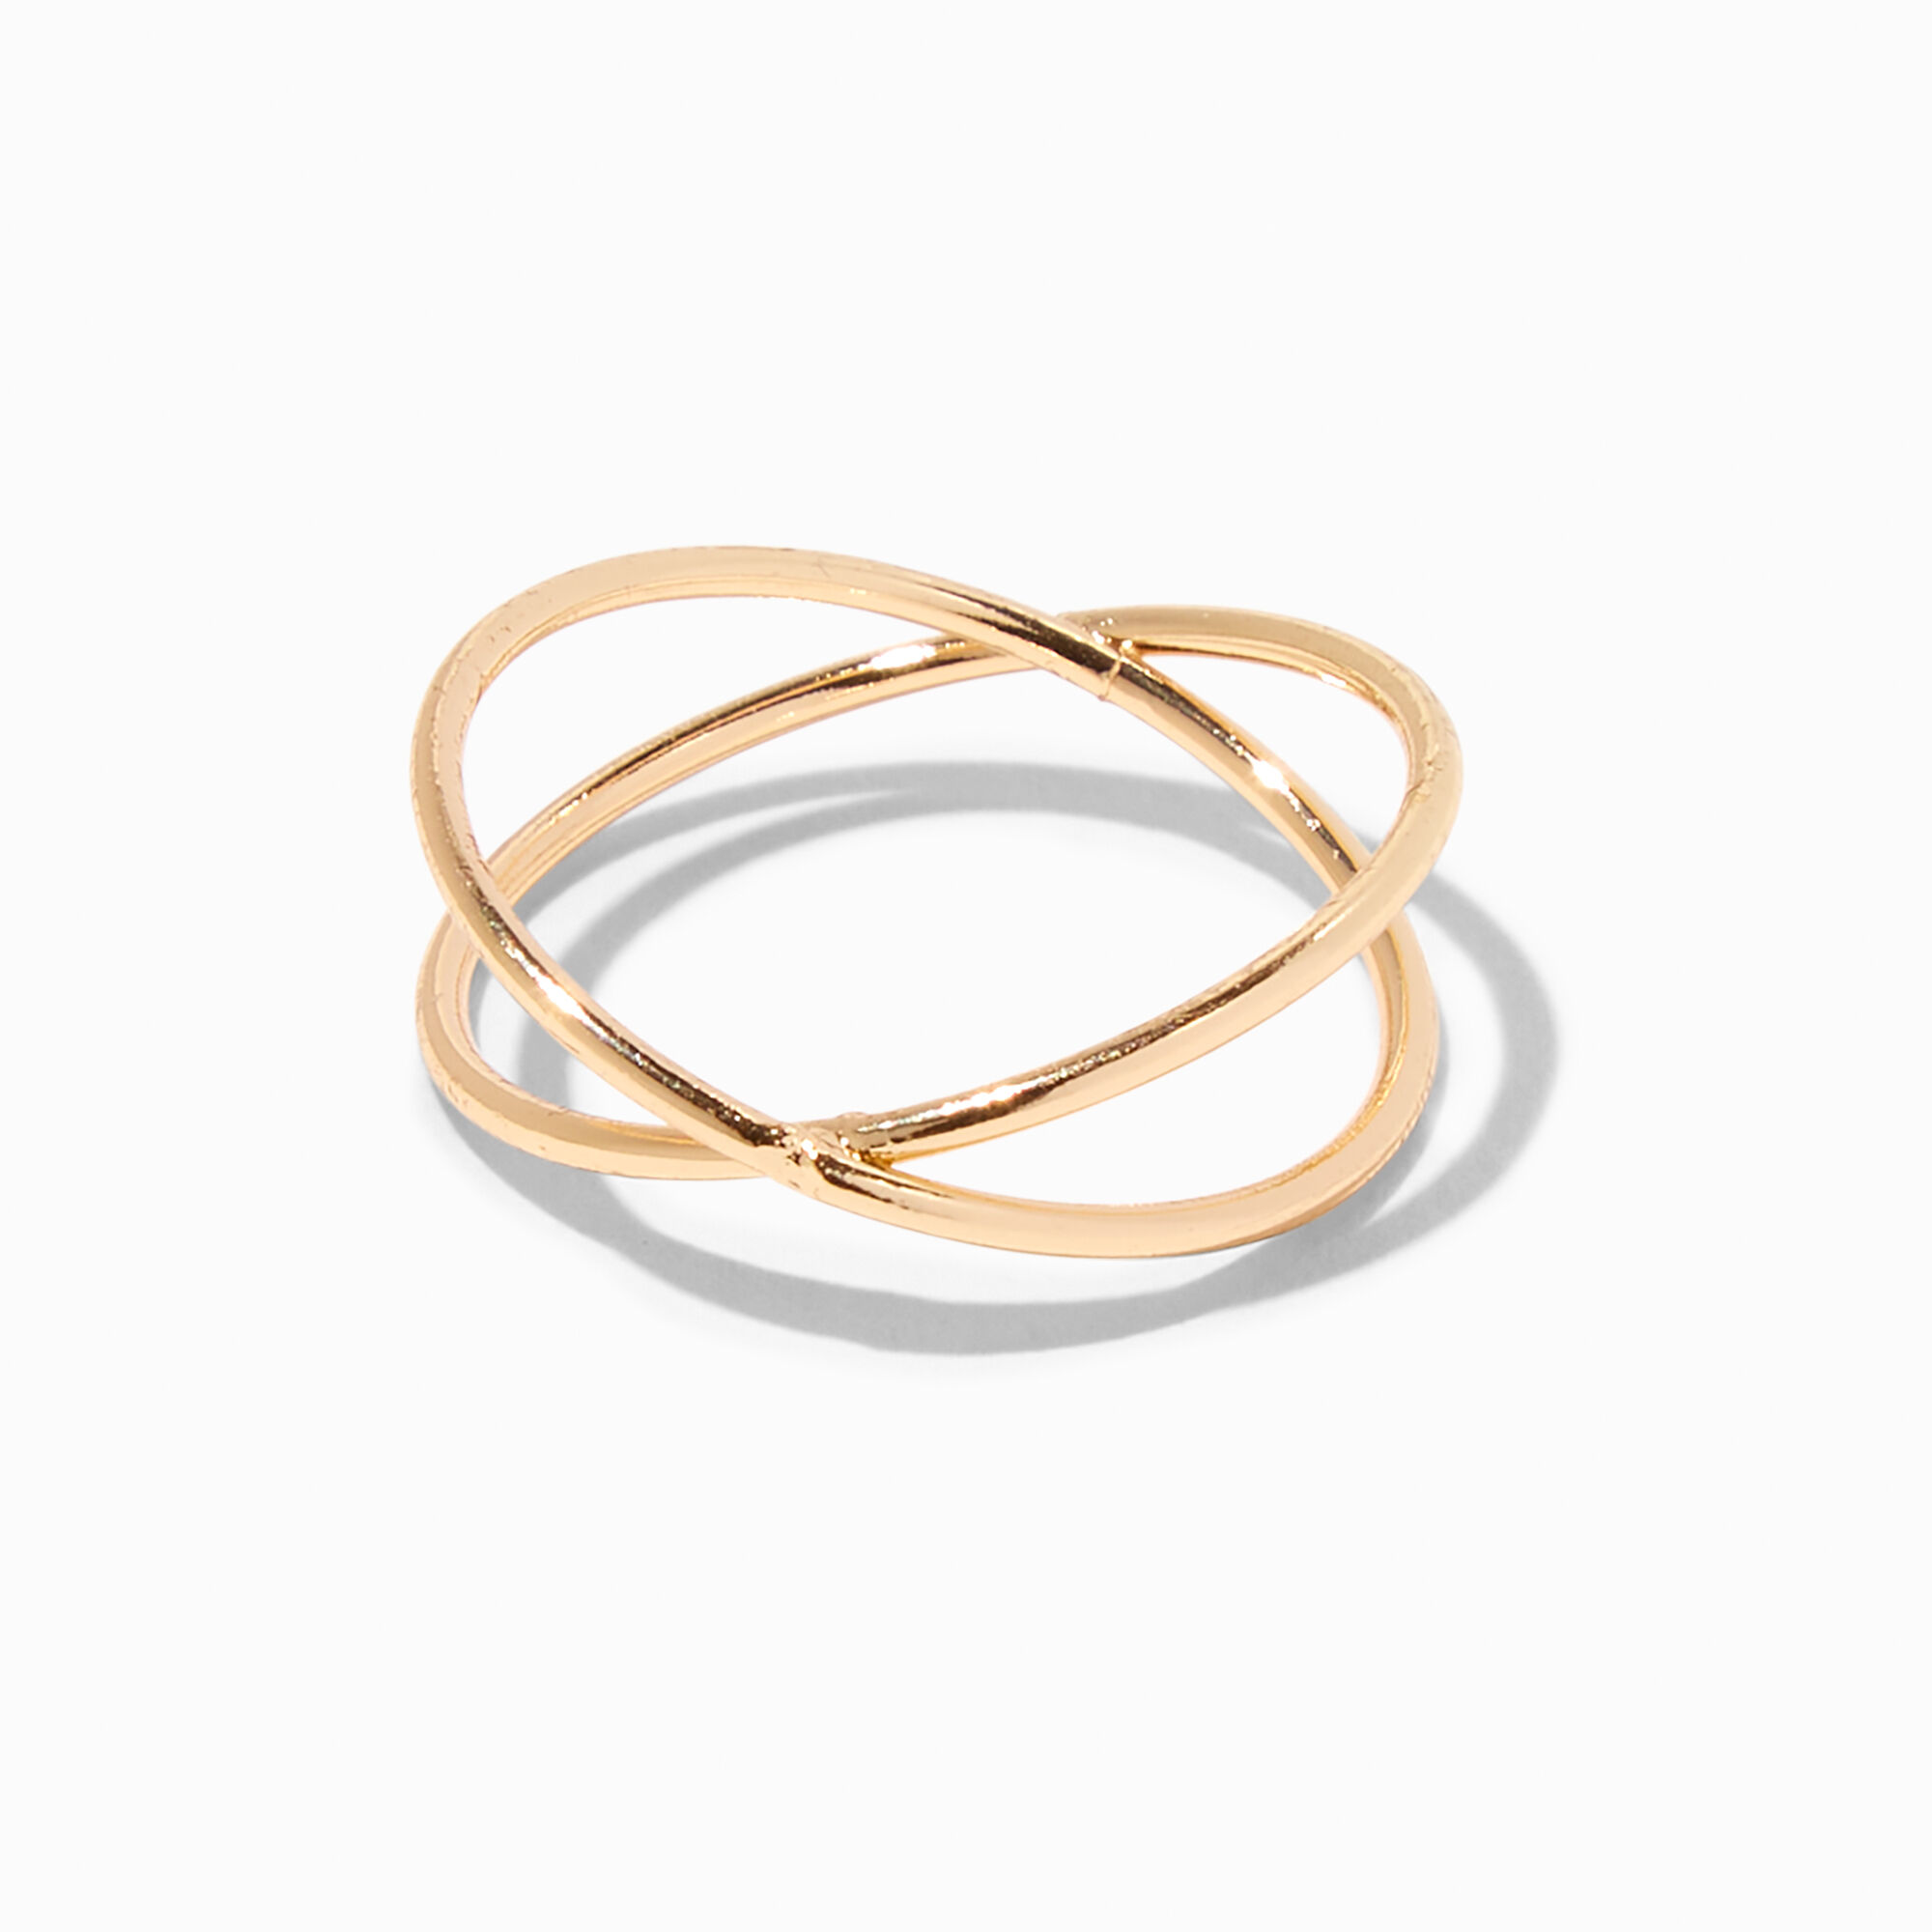 View Claires Criss Cross Ring Gold information